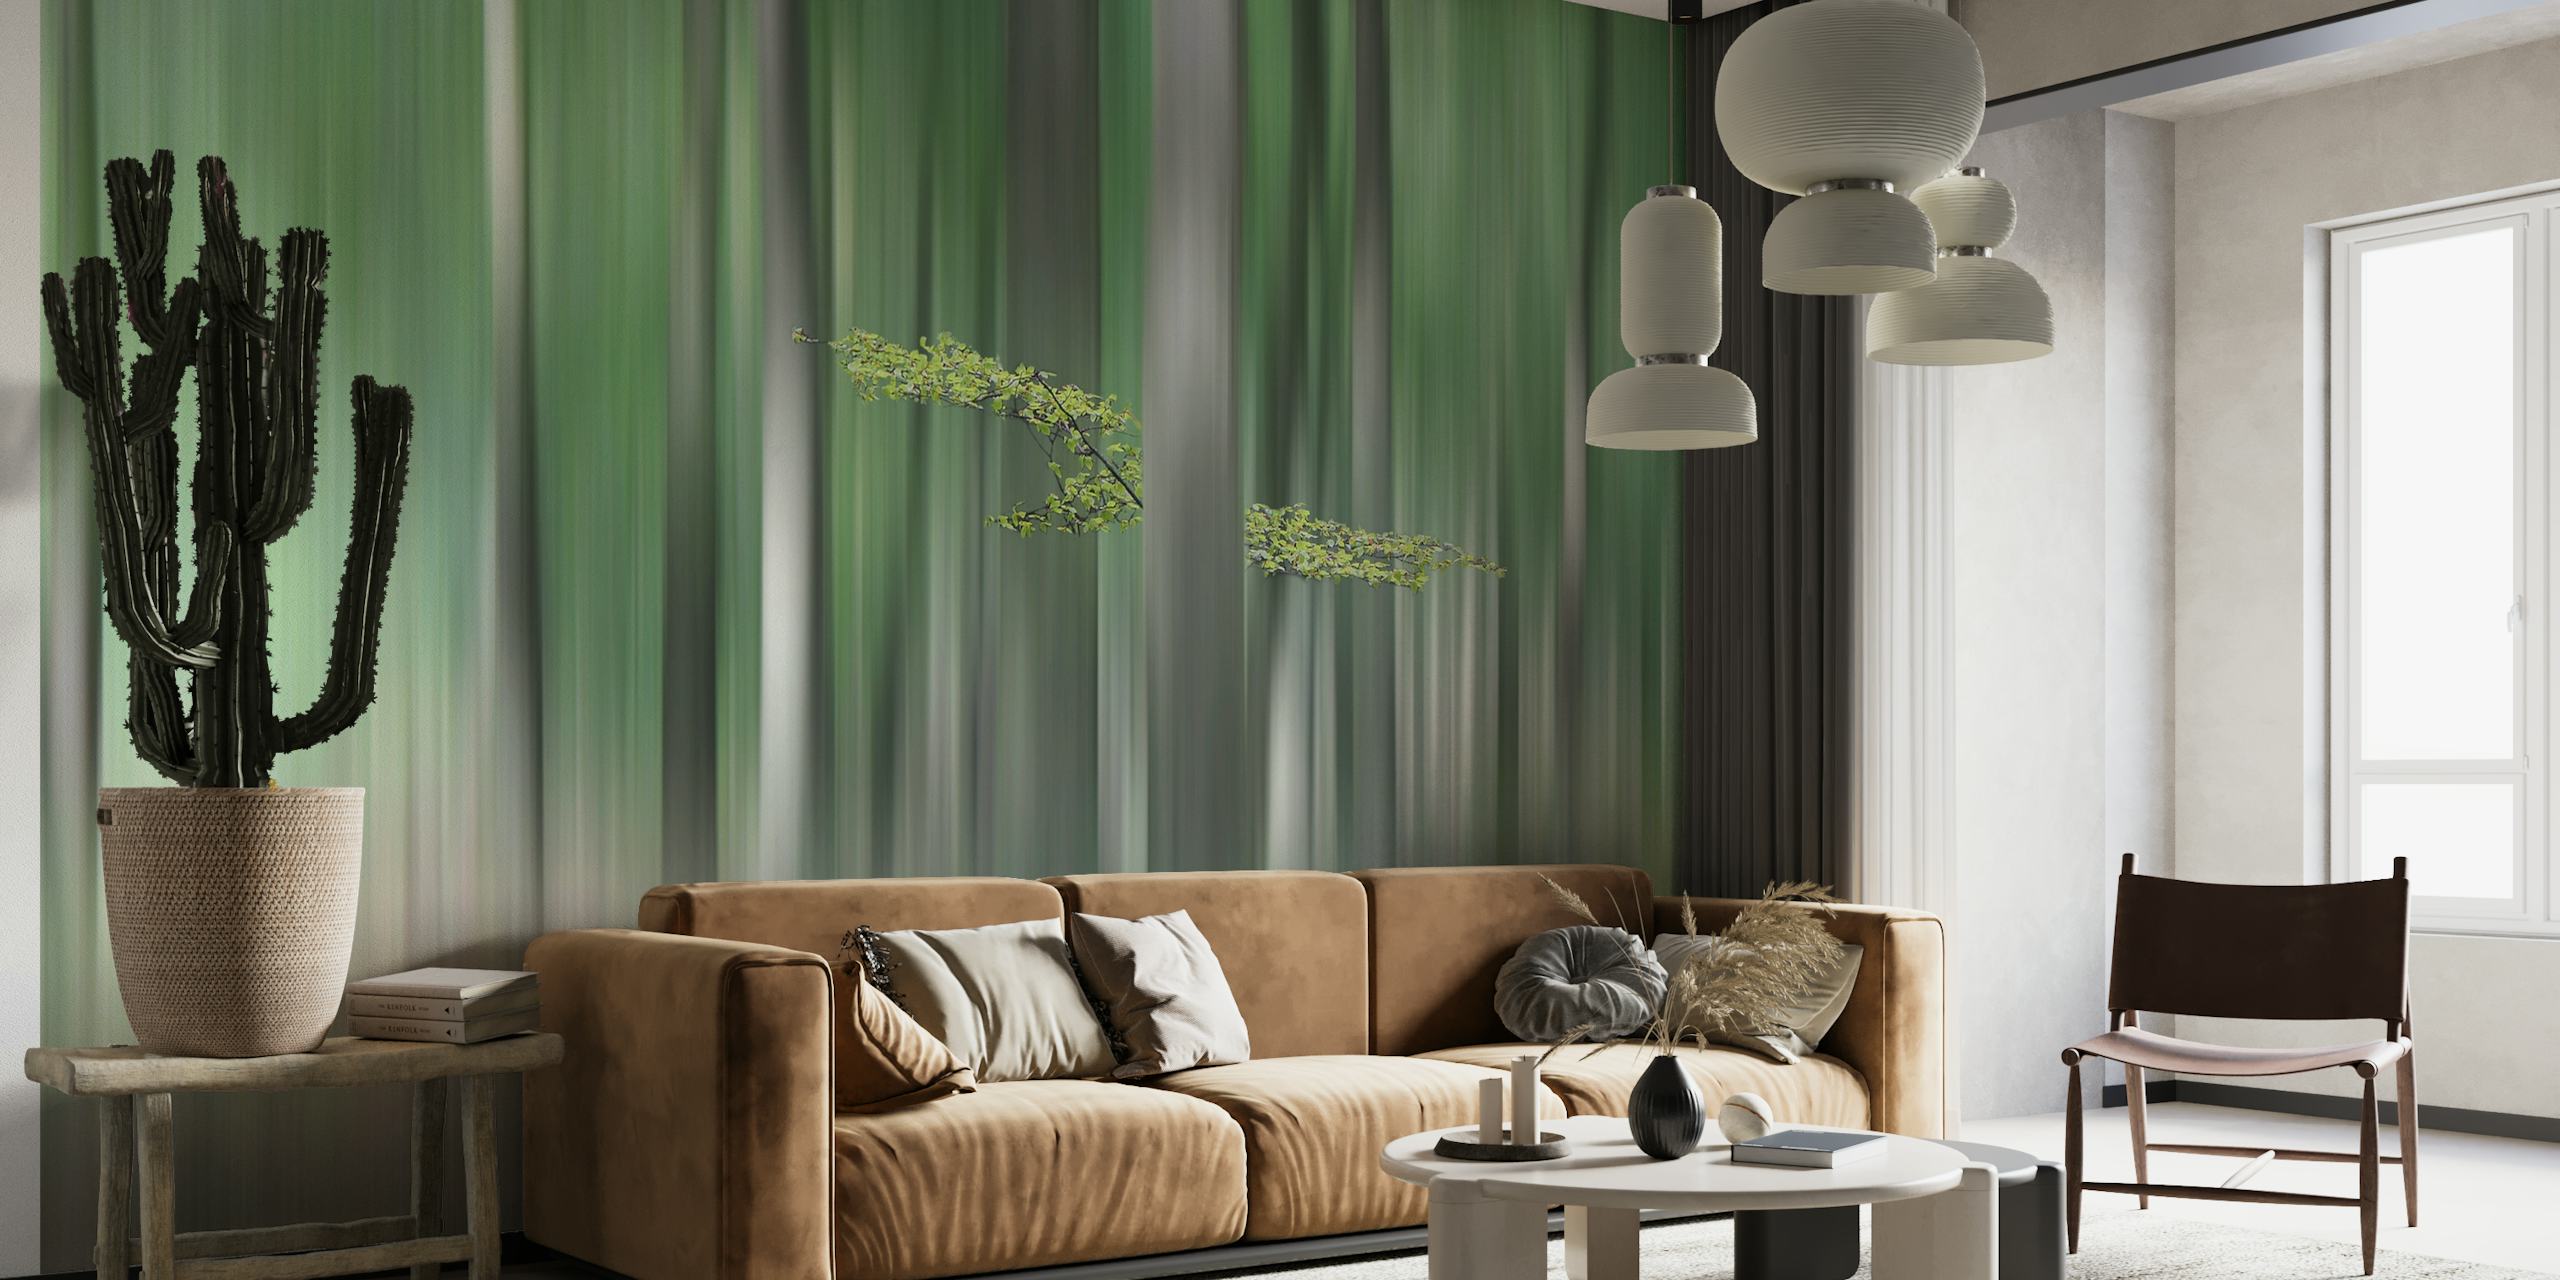 Blurred forest scene wall mural with sunlit greenery